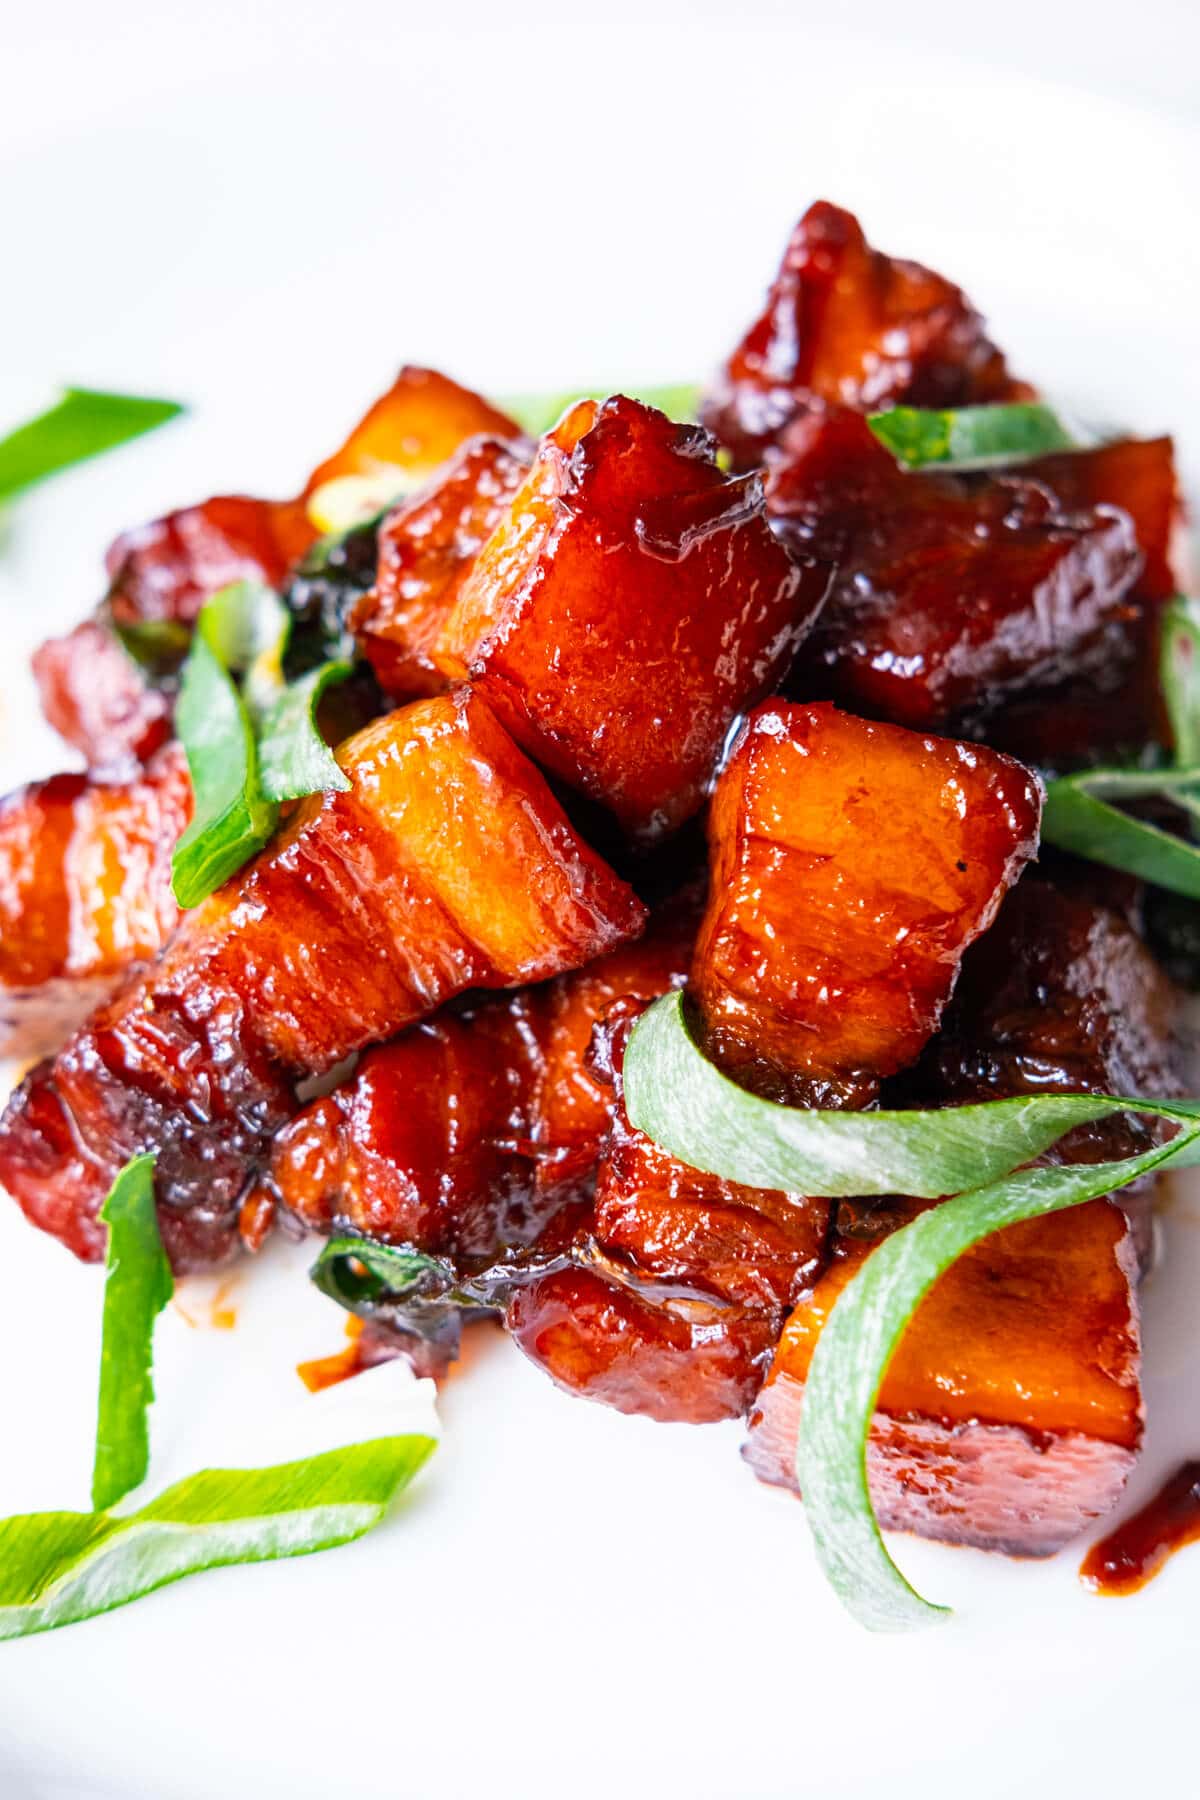 Tender braised pork belly shows clear layer of lean meat and fat. 